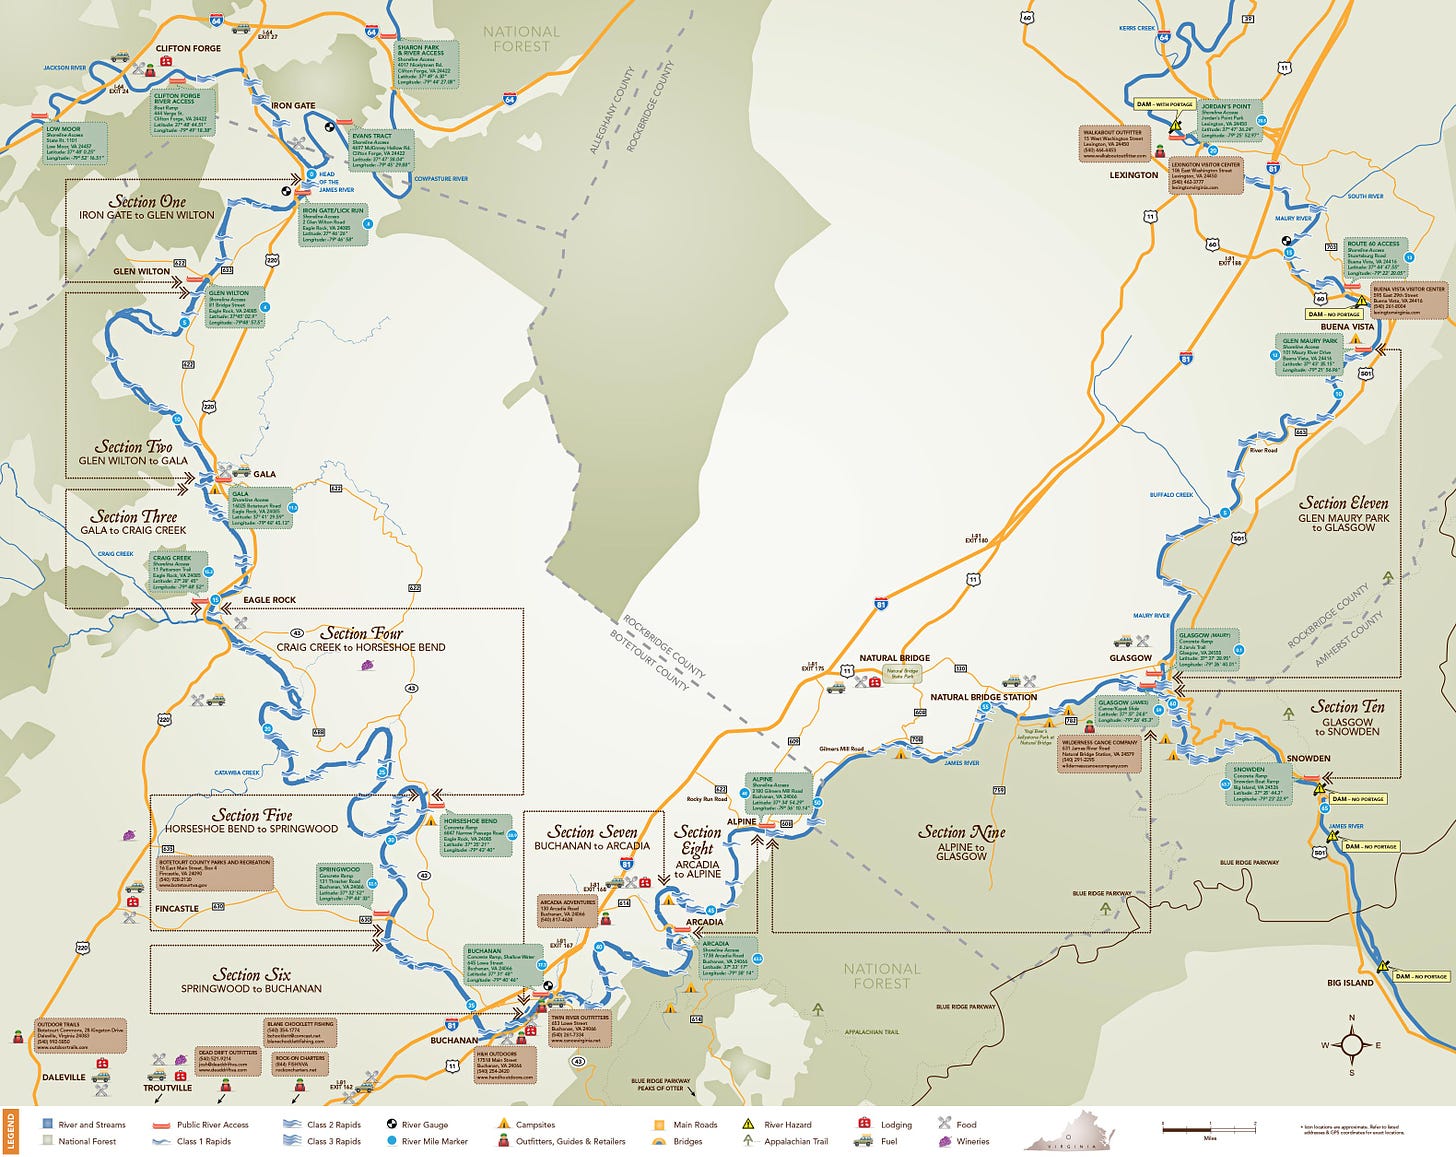 Maps - The Upper James River Water Trail